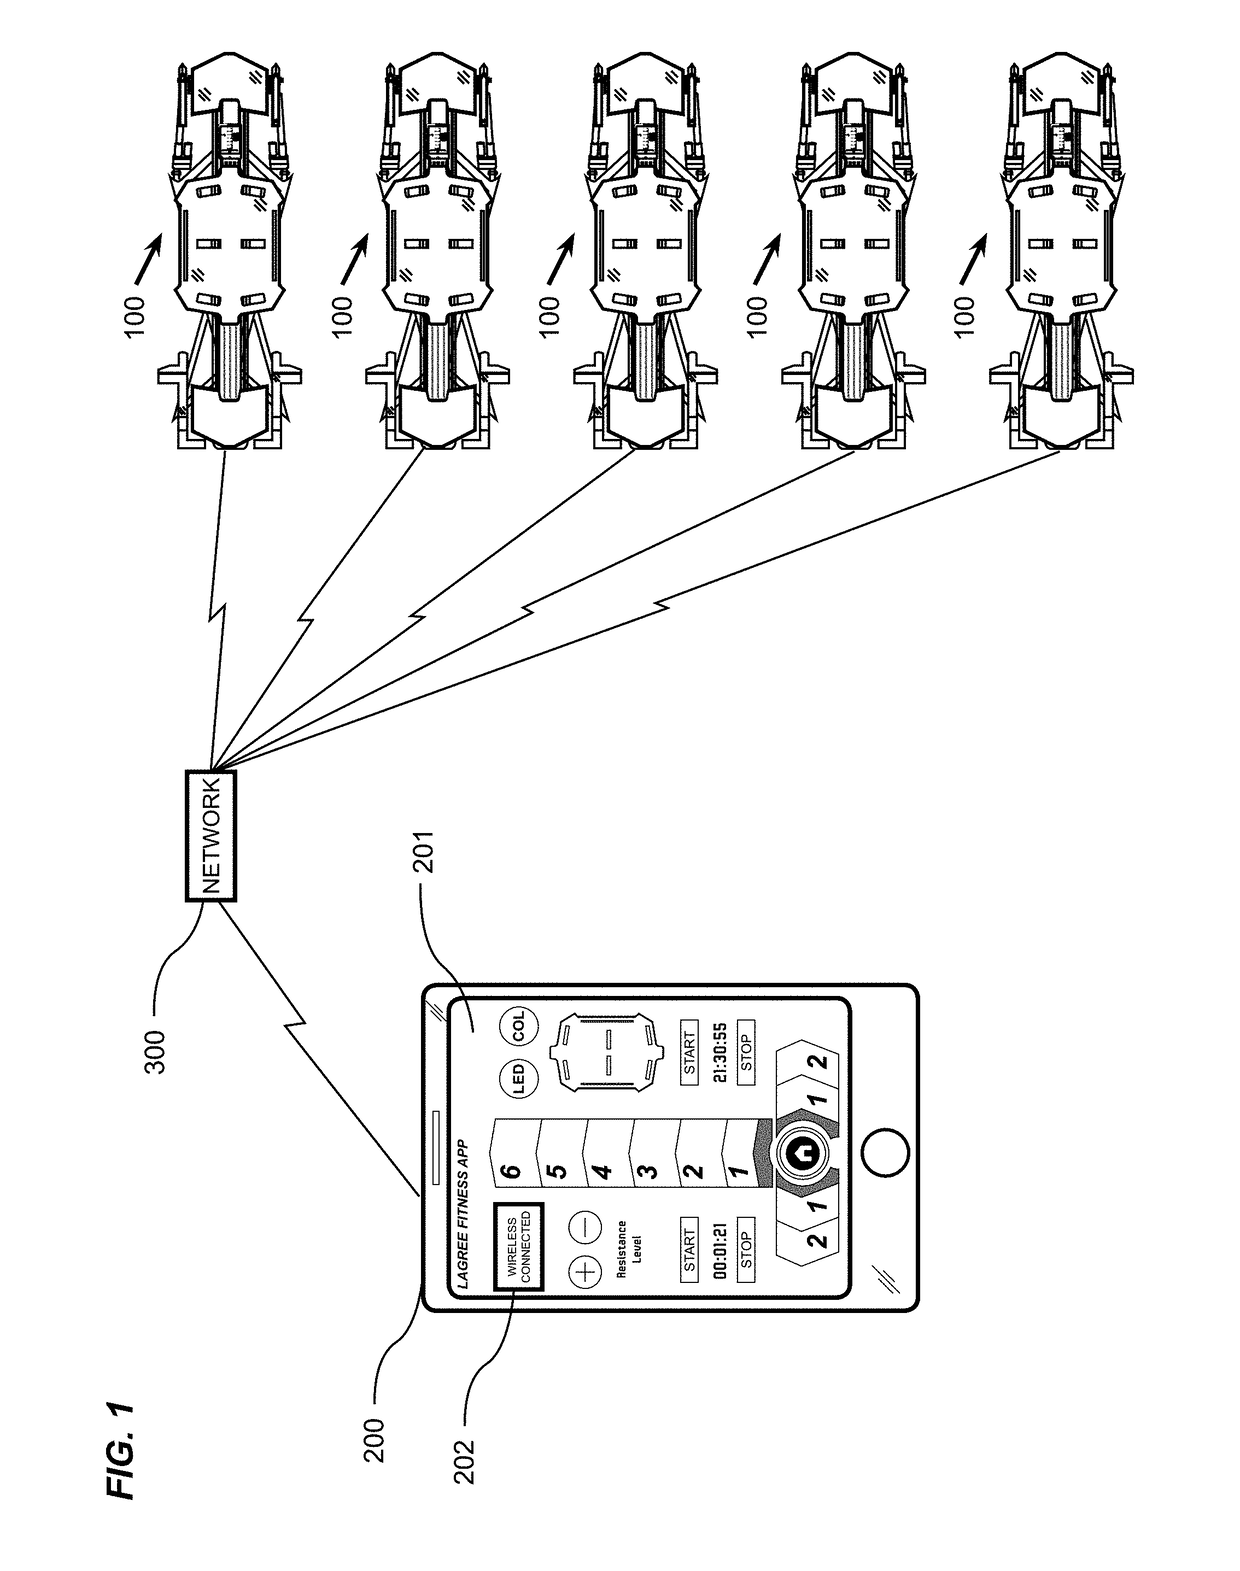 System and Method for Networking Fitness Machines